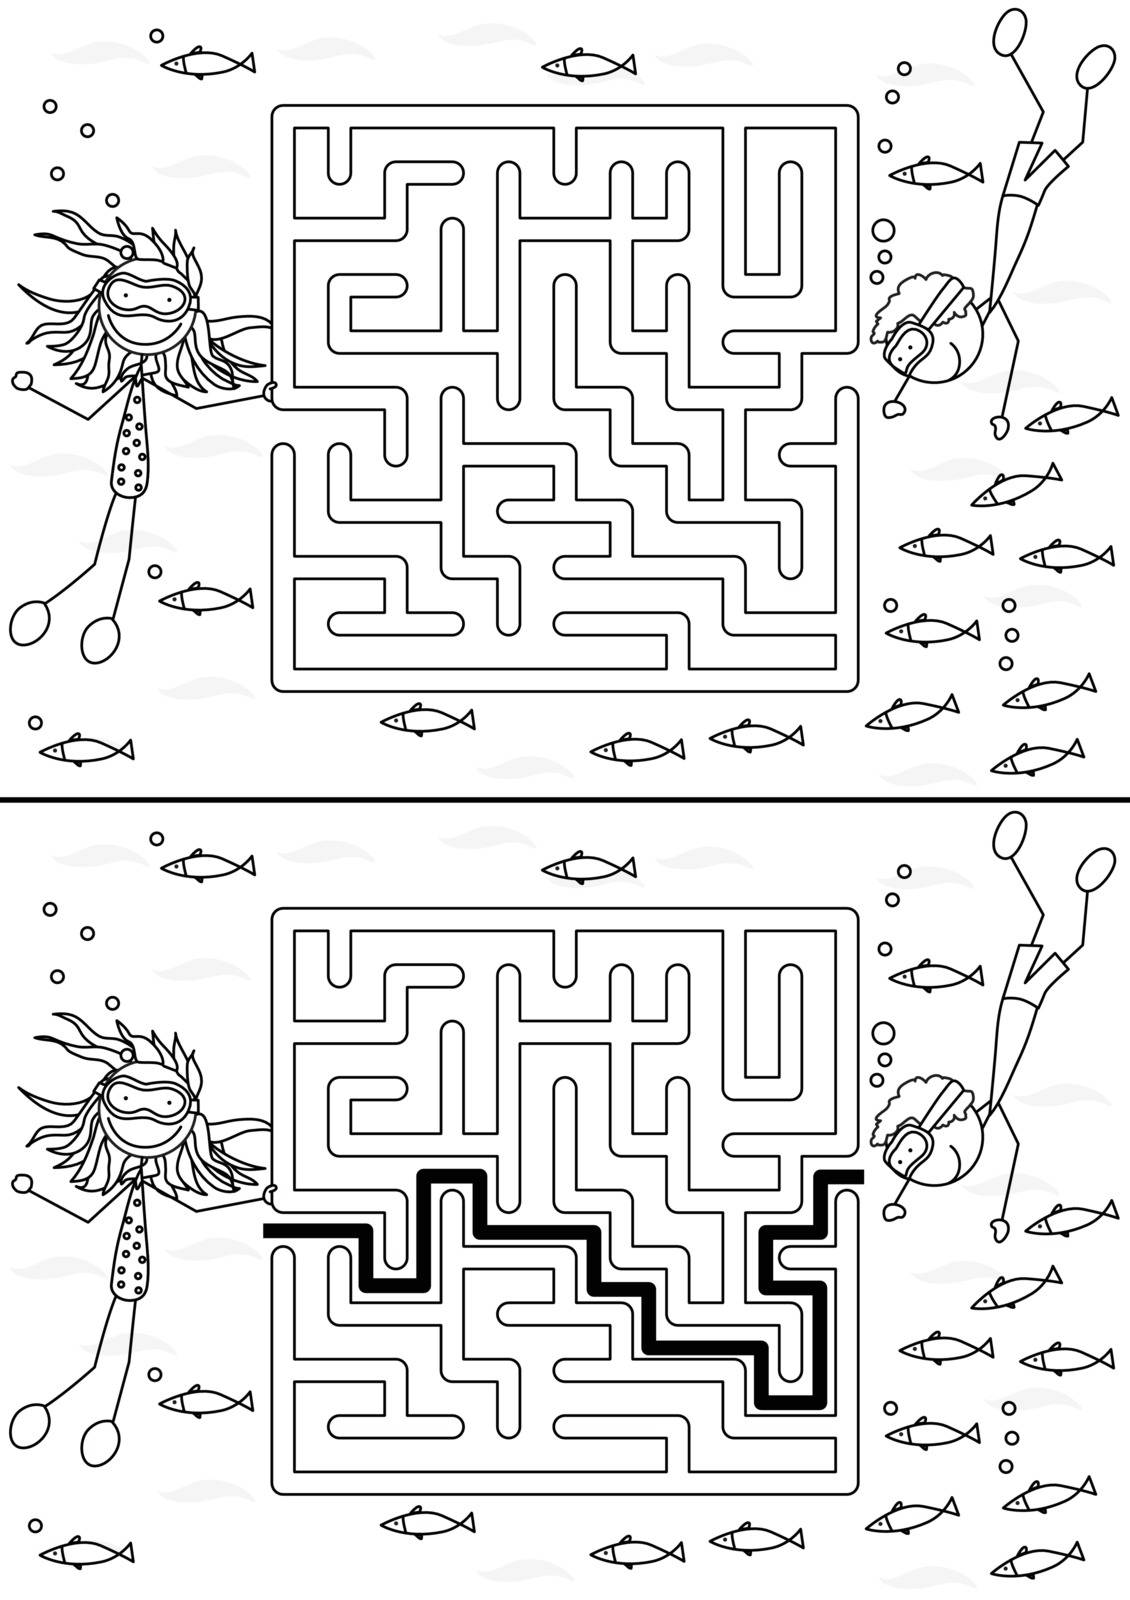 Sea maze for kids with a solution in black and white